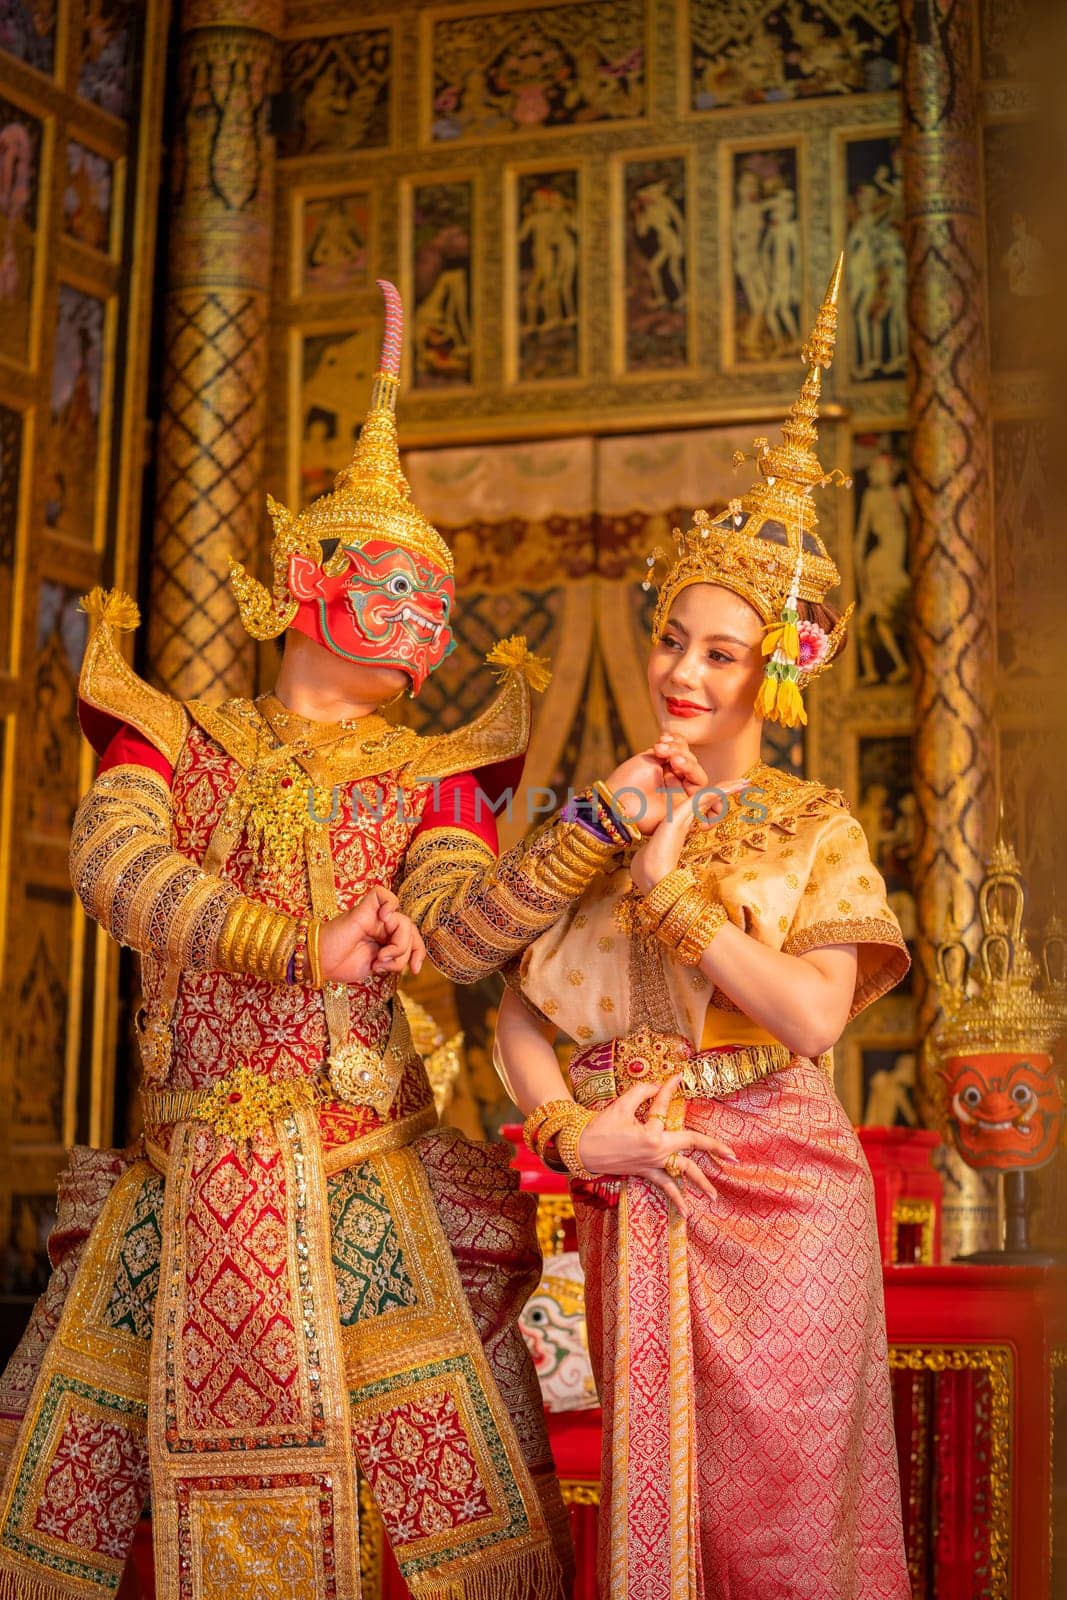 Pantomime (Khon) or traditional Thai classic masked play enacting scenes from the Ramakien (Ramayana) red giant stay with woman with a background of Thai paintings in a public place. by nrradmin